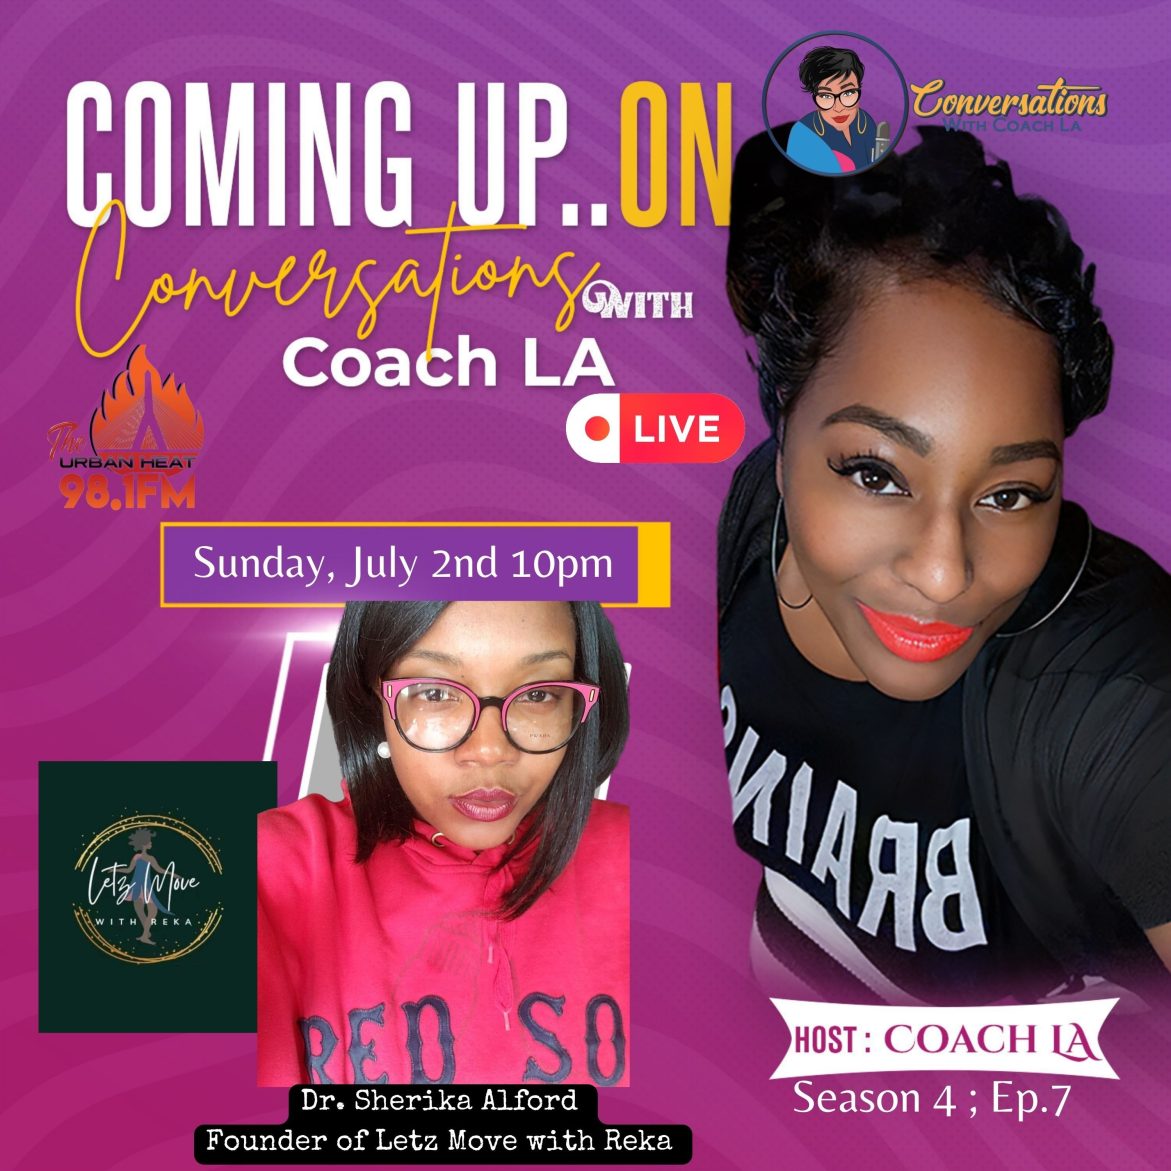 Black Podcasting - Making the Shift to SELF featuring Dr. Sherika Alford